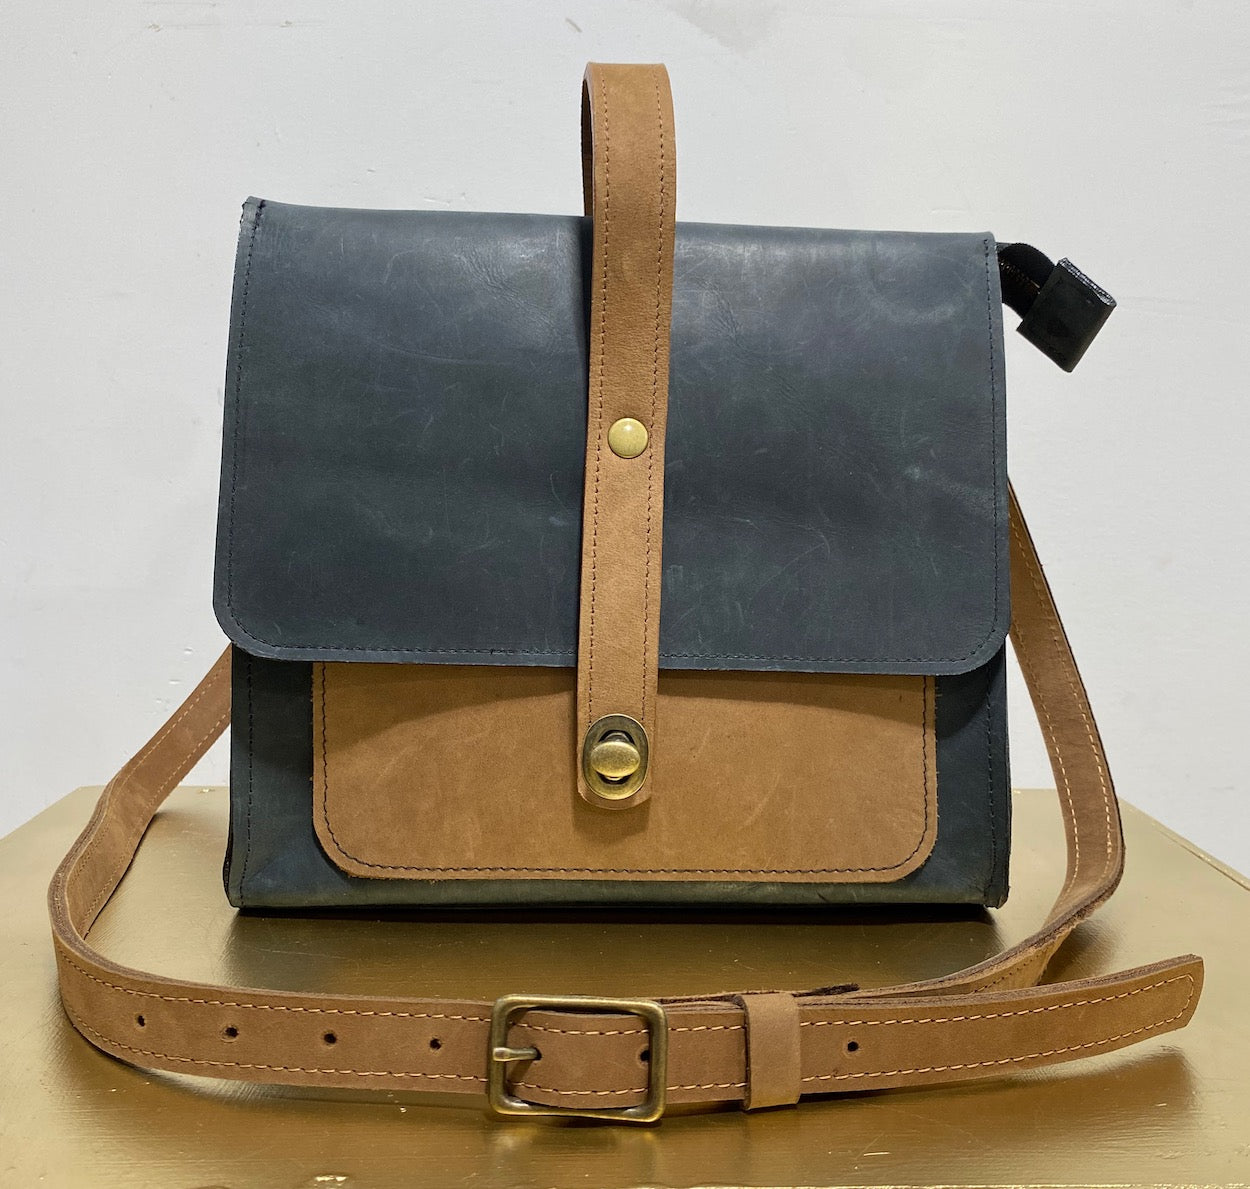 Leather Satchel Purse in Black and Tan